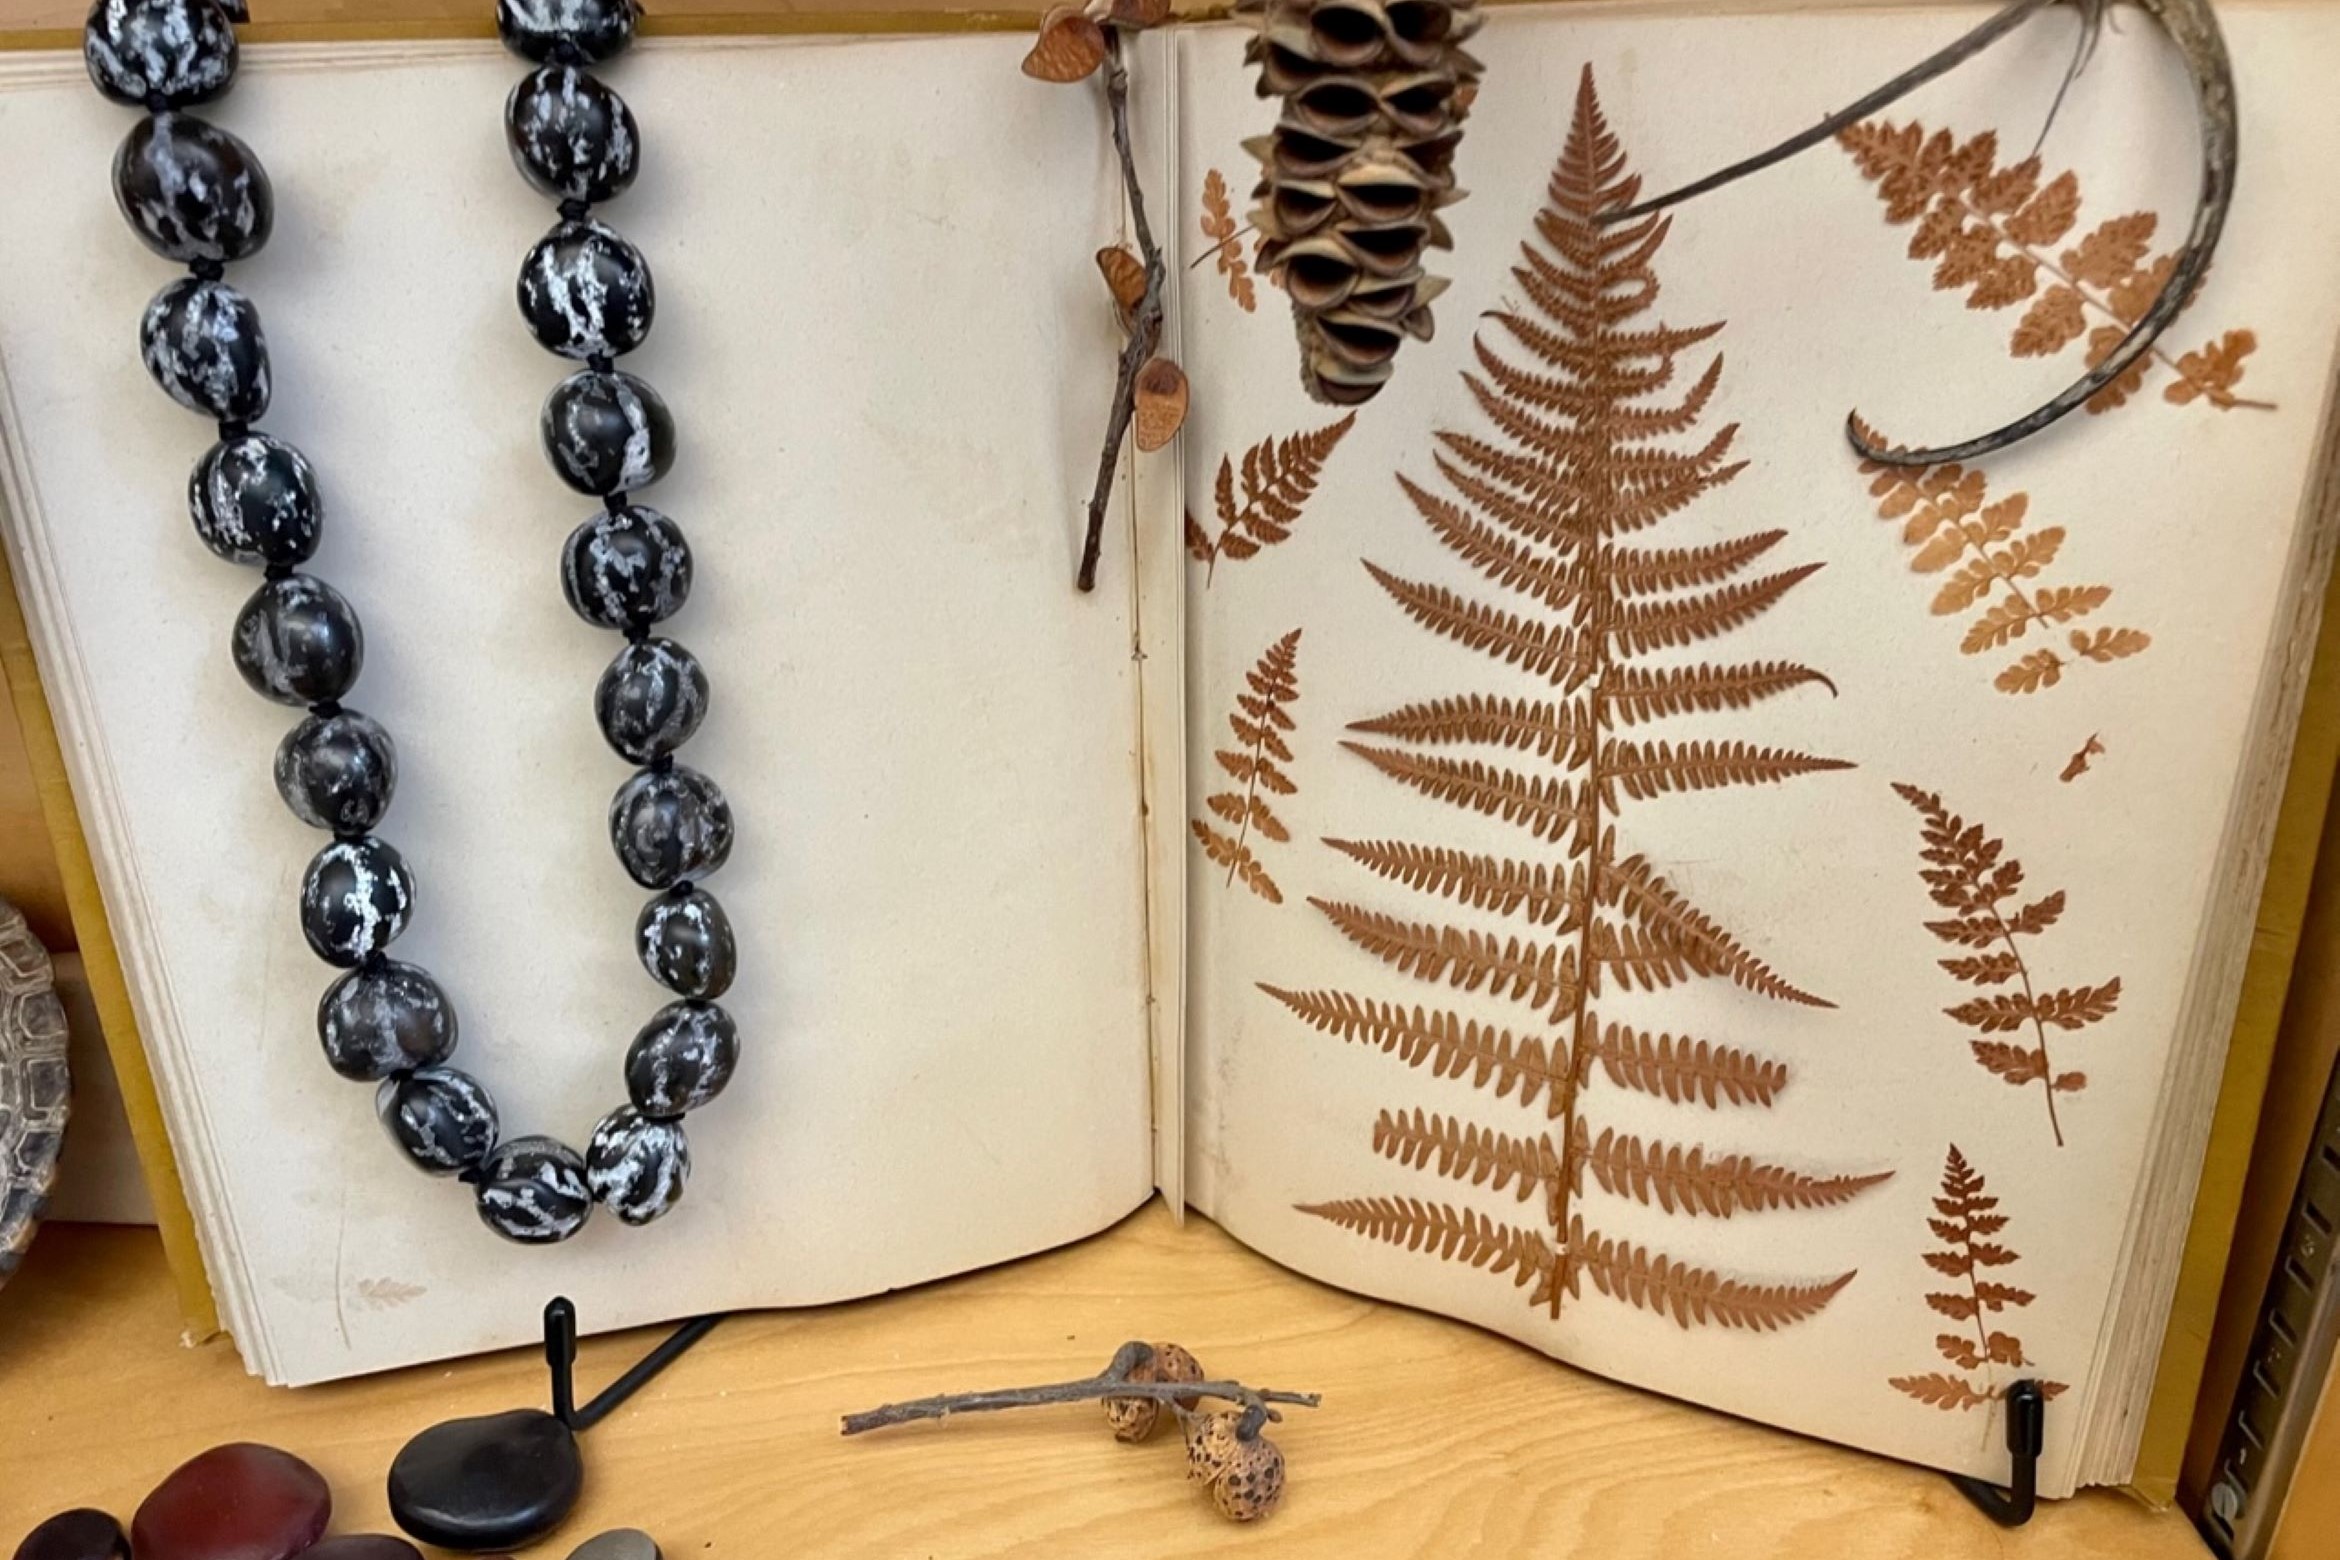 Different kinds of seeds arranged around and on a book open to a page with a dried fern on it